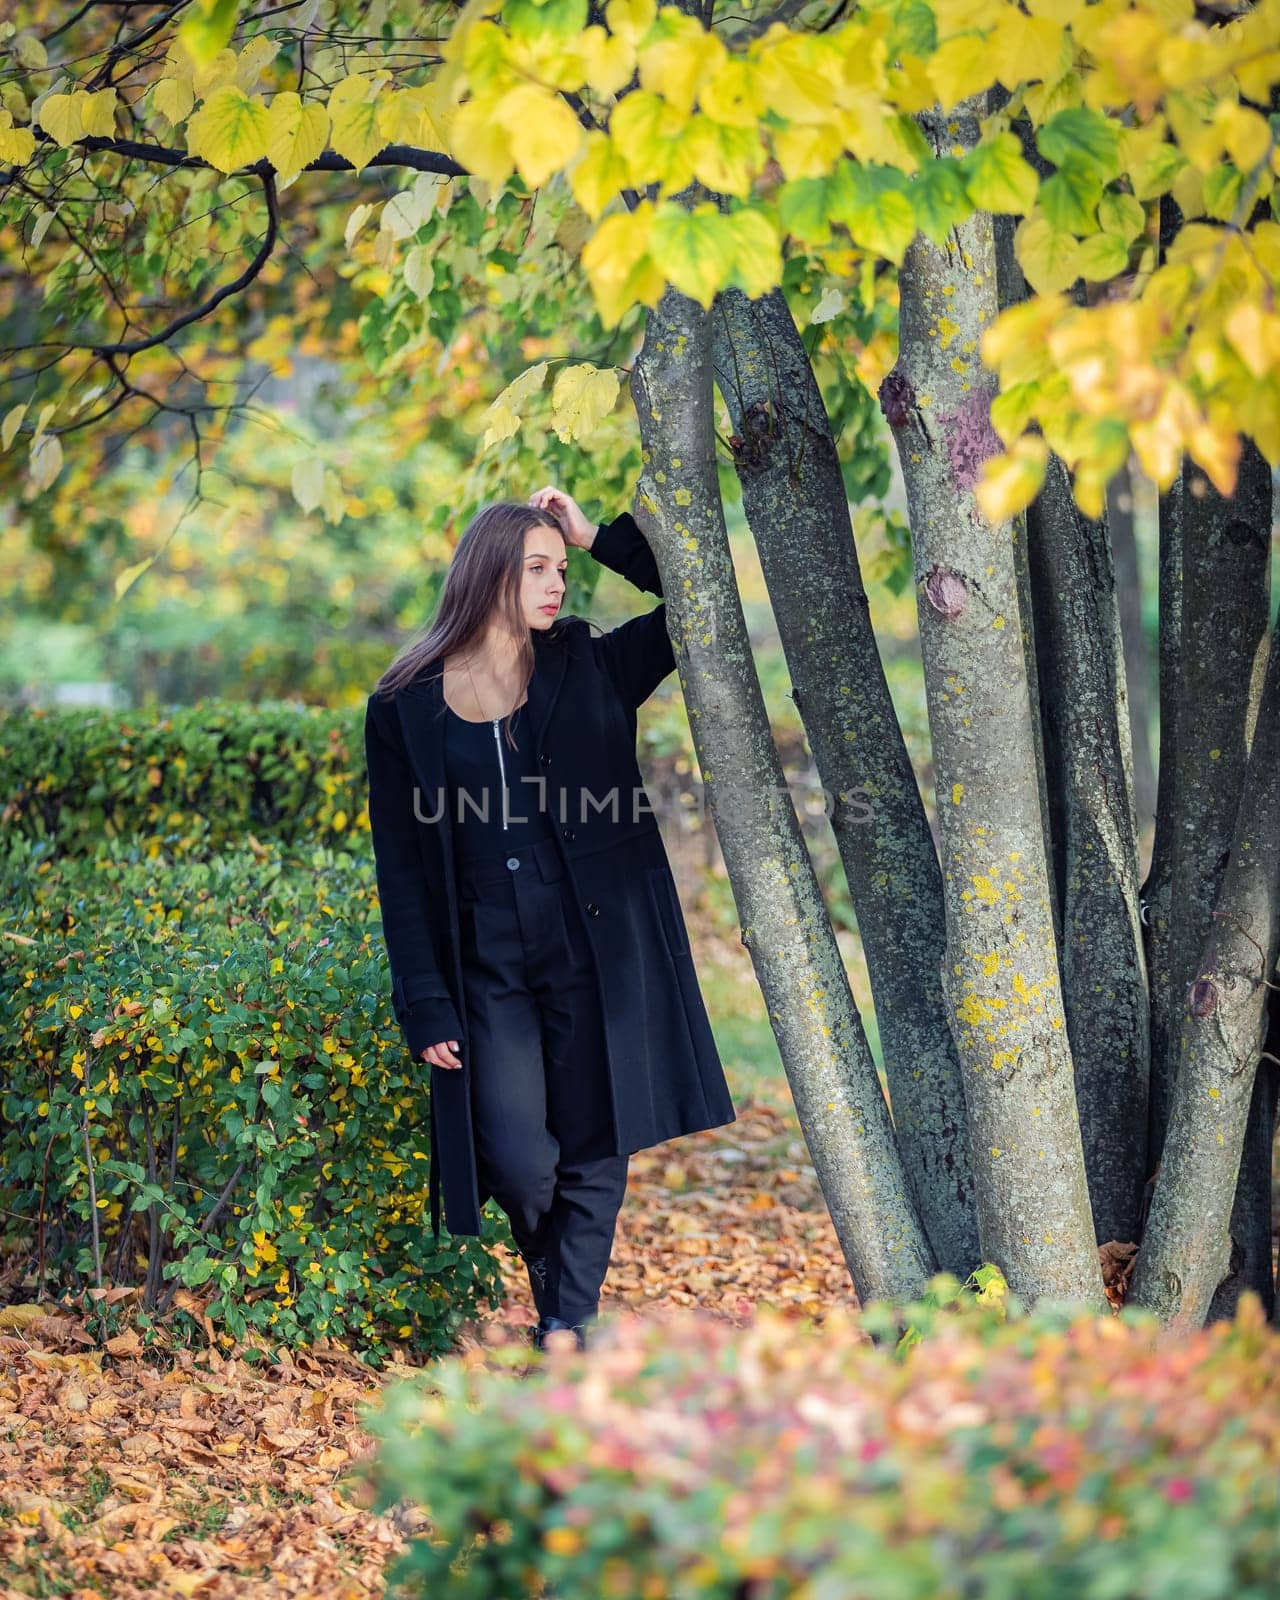 A beautiful girl stands by a tree in an autumn park. by Yurich32